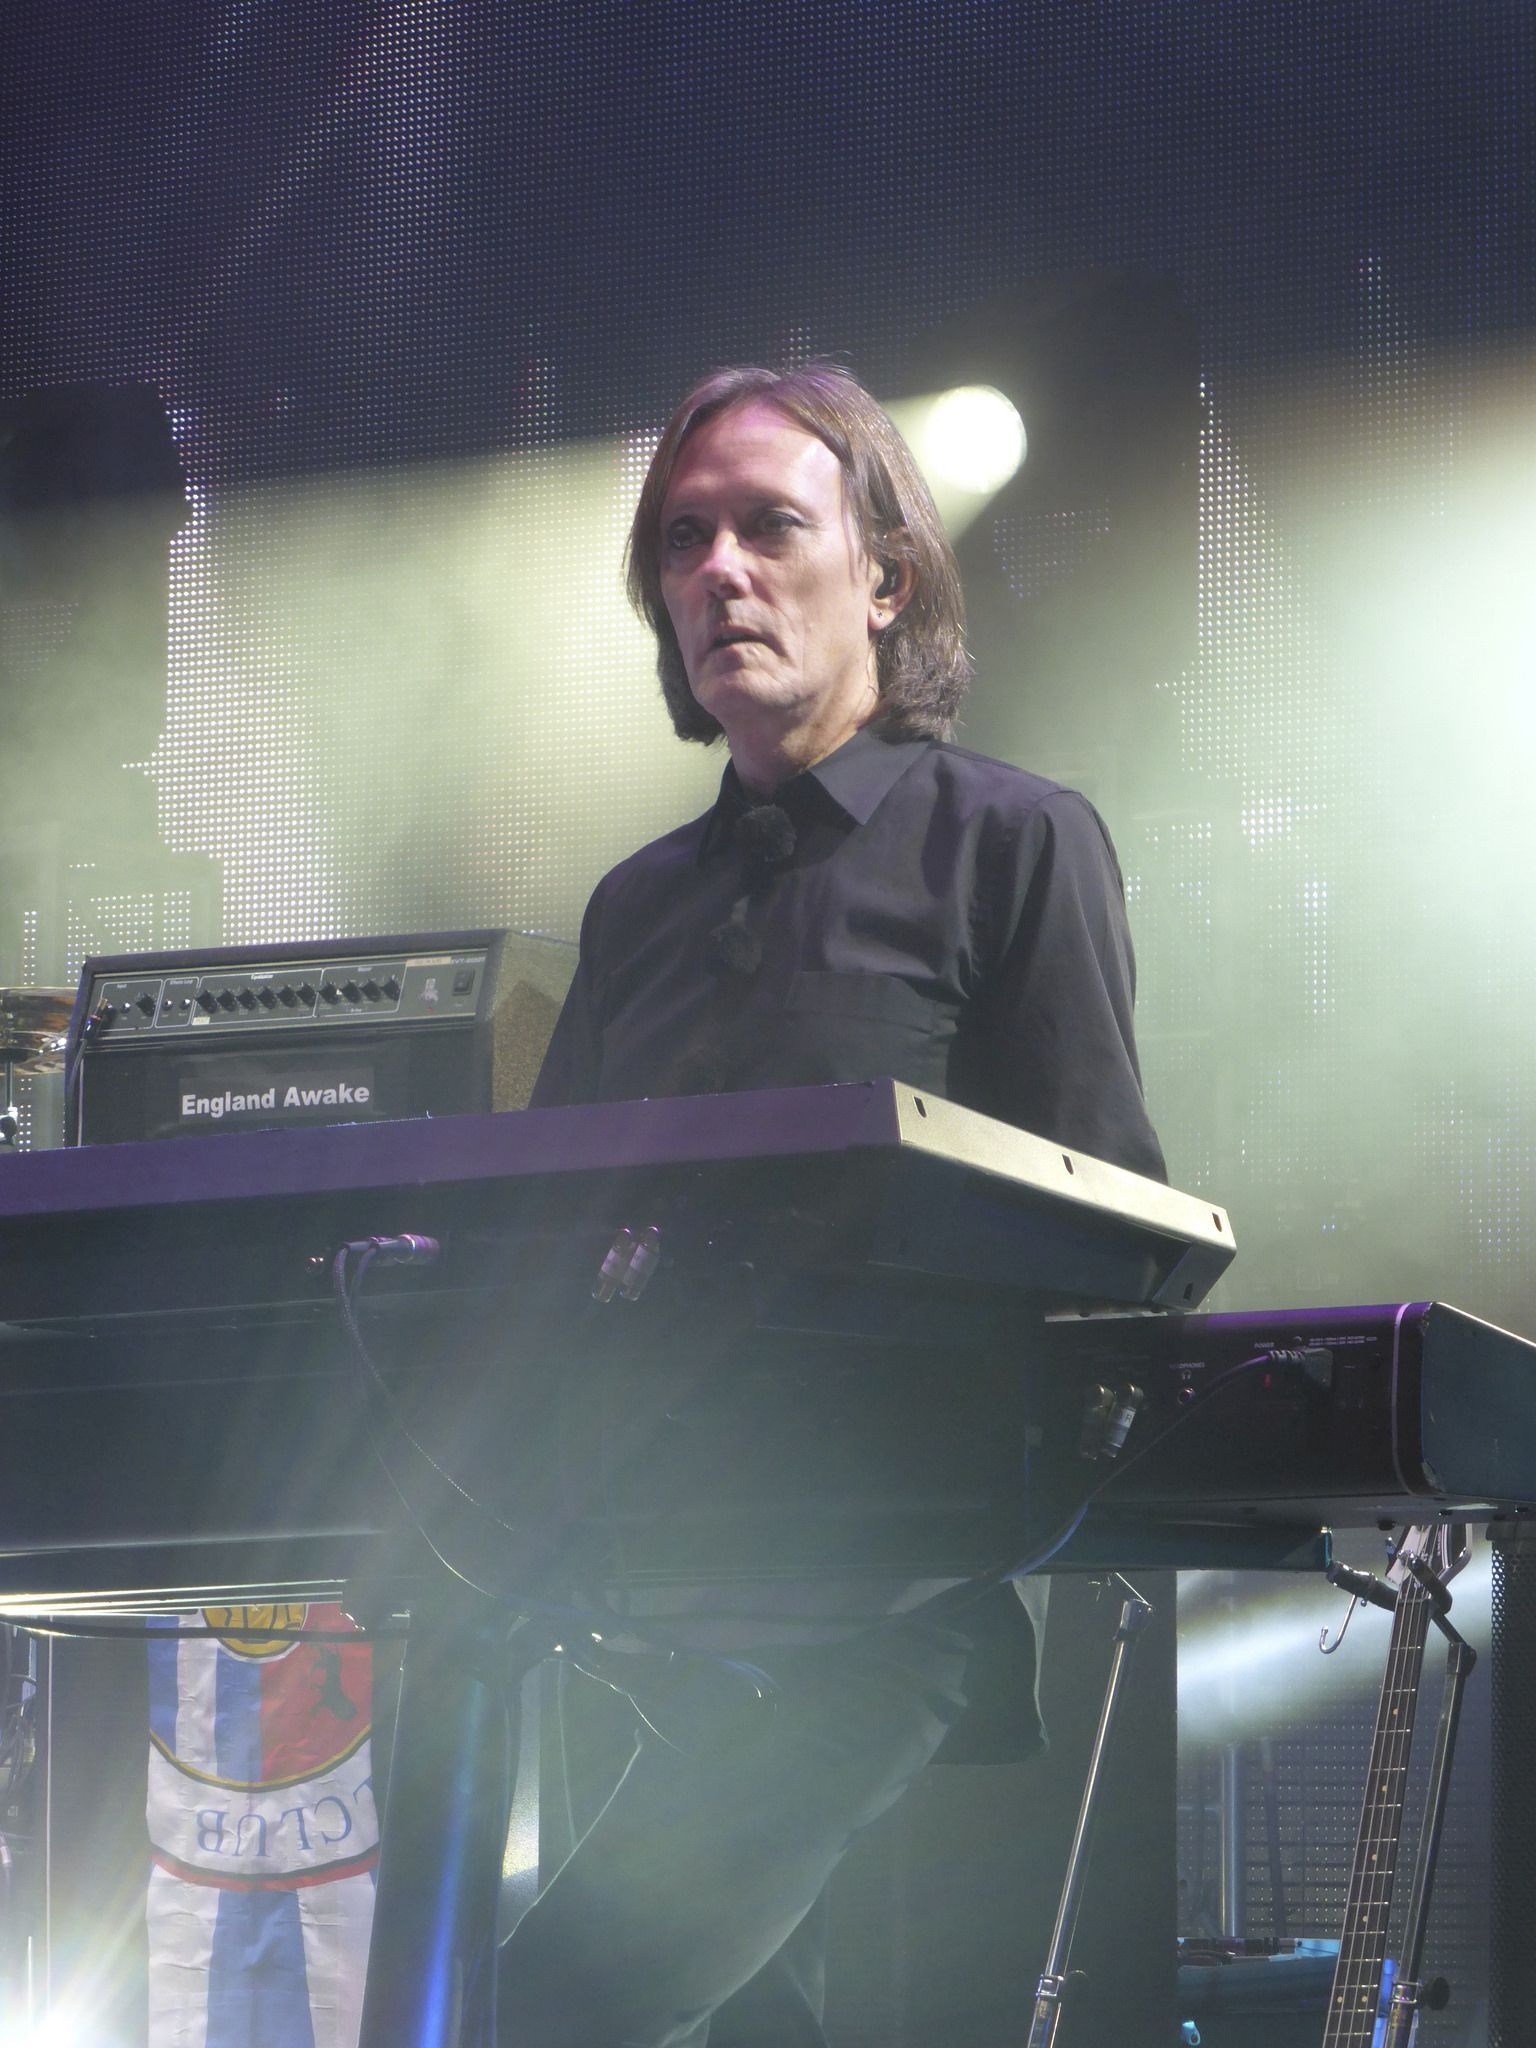 Roger O'Donnell, Band's dark side, The Cure's keyboardist, 1540x2050 HD Handy